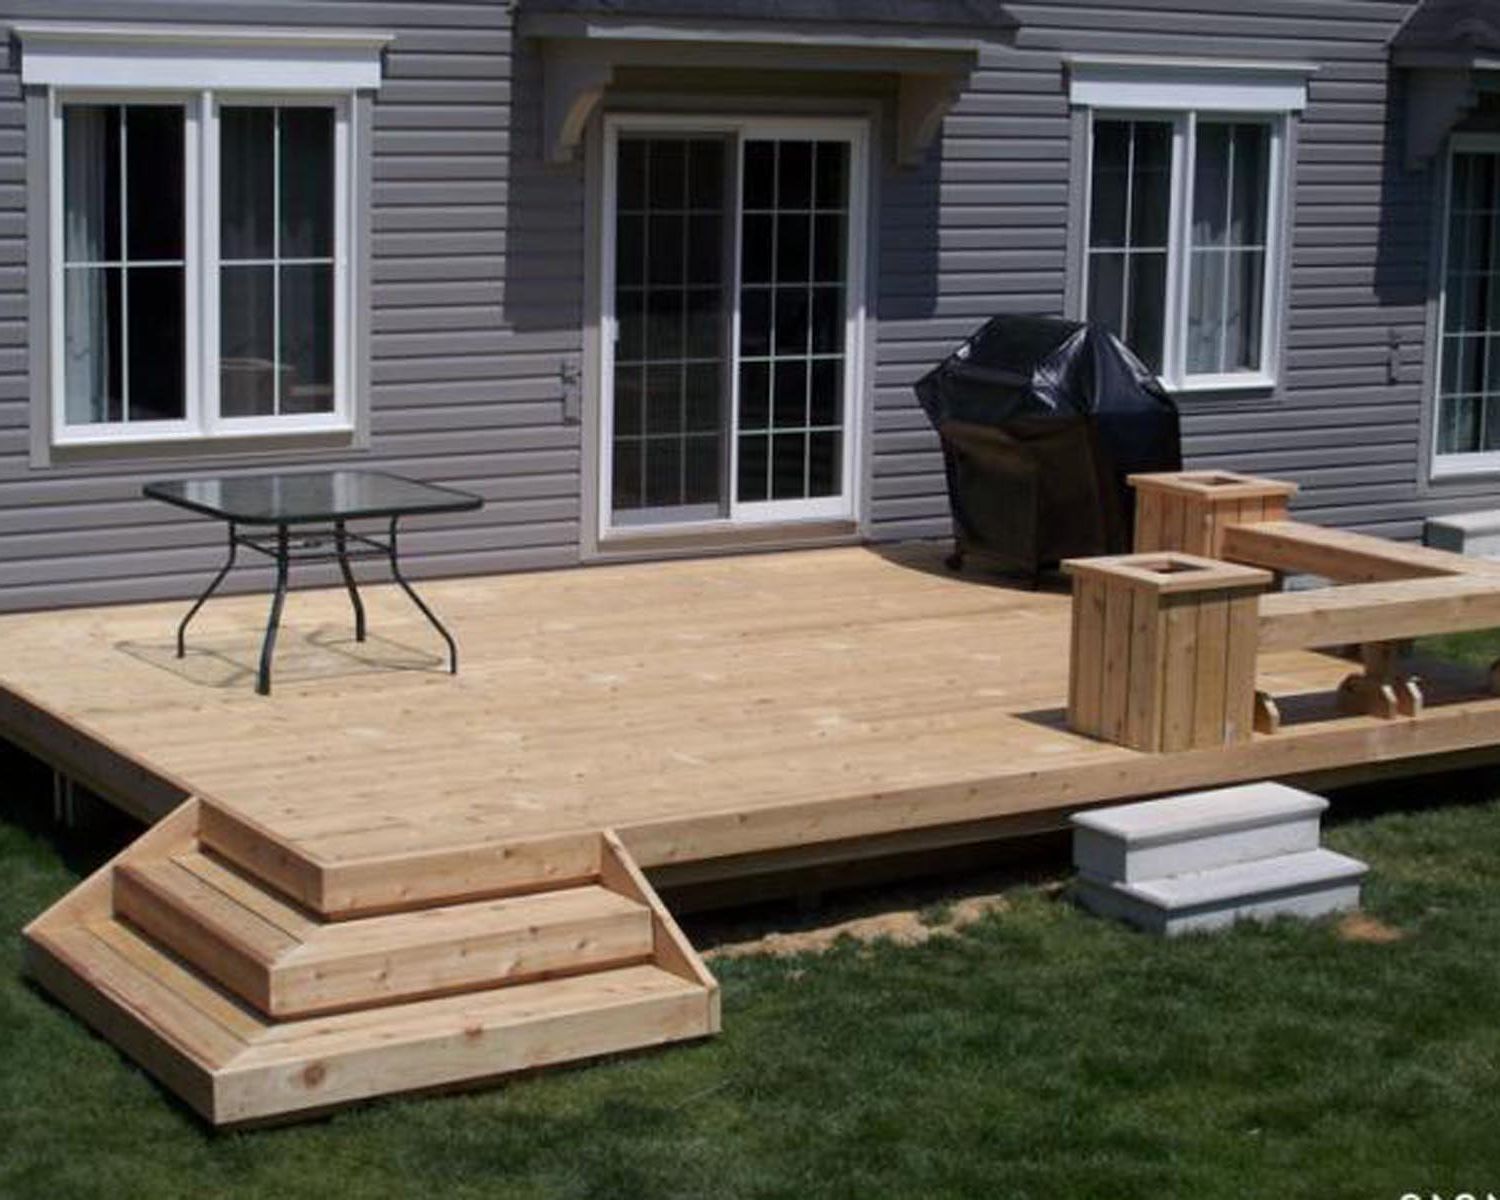 small deck ideas outdoor , grabbing exterior beauty with small backyard deck ideas : simple QCIAQLM